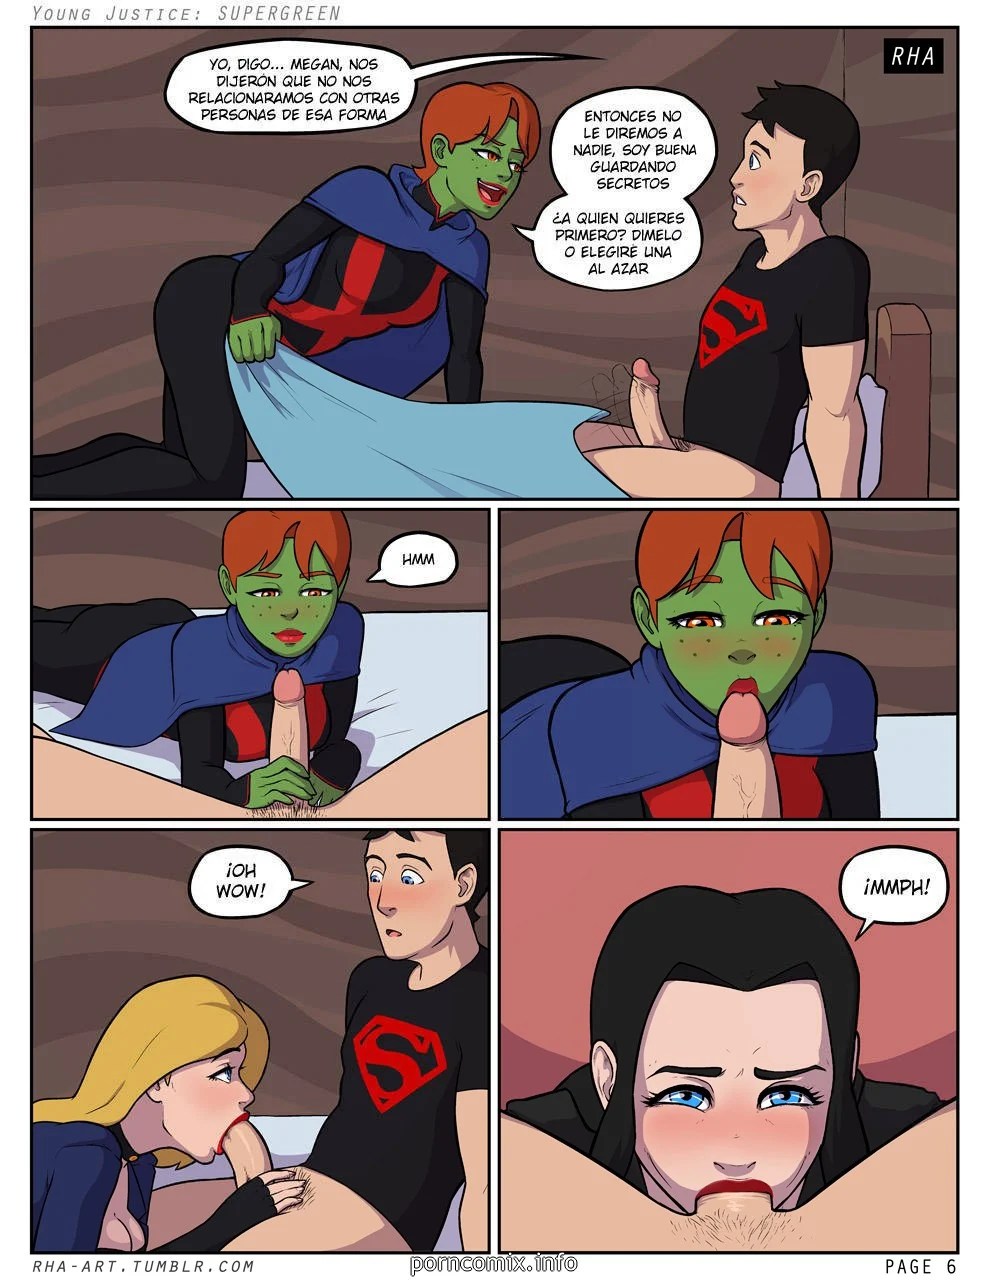 Young Justice – Supergreen - e7a0ee39e90af0475f87bd9b4dfd7bbd